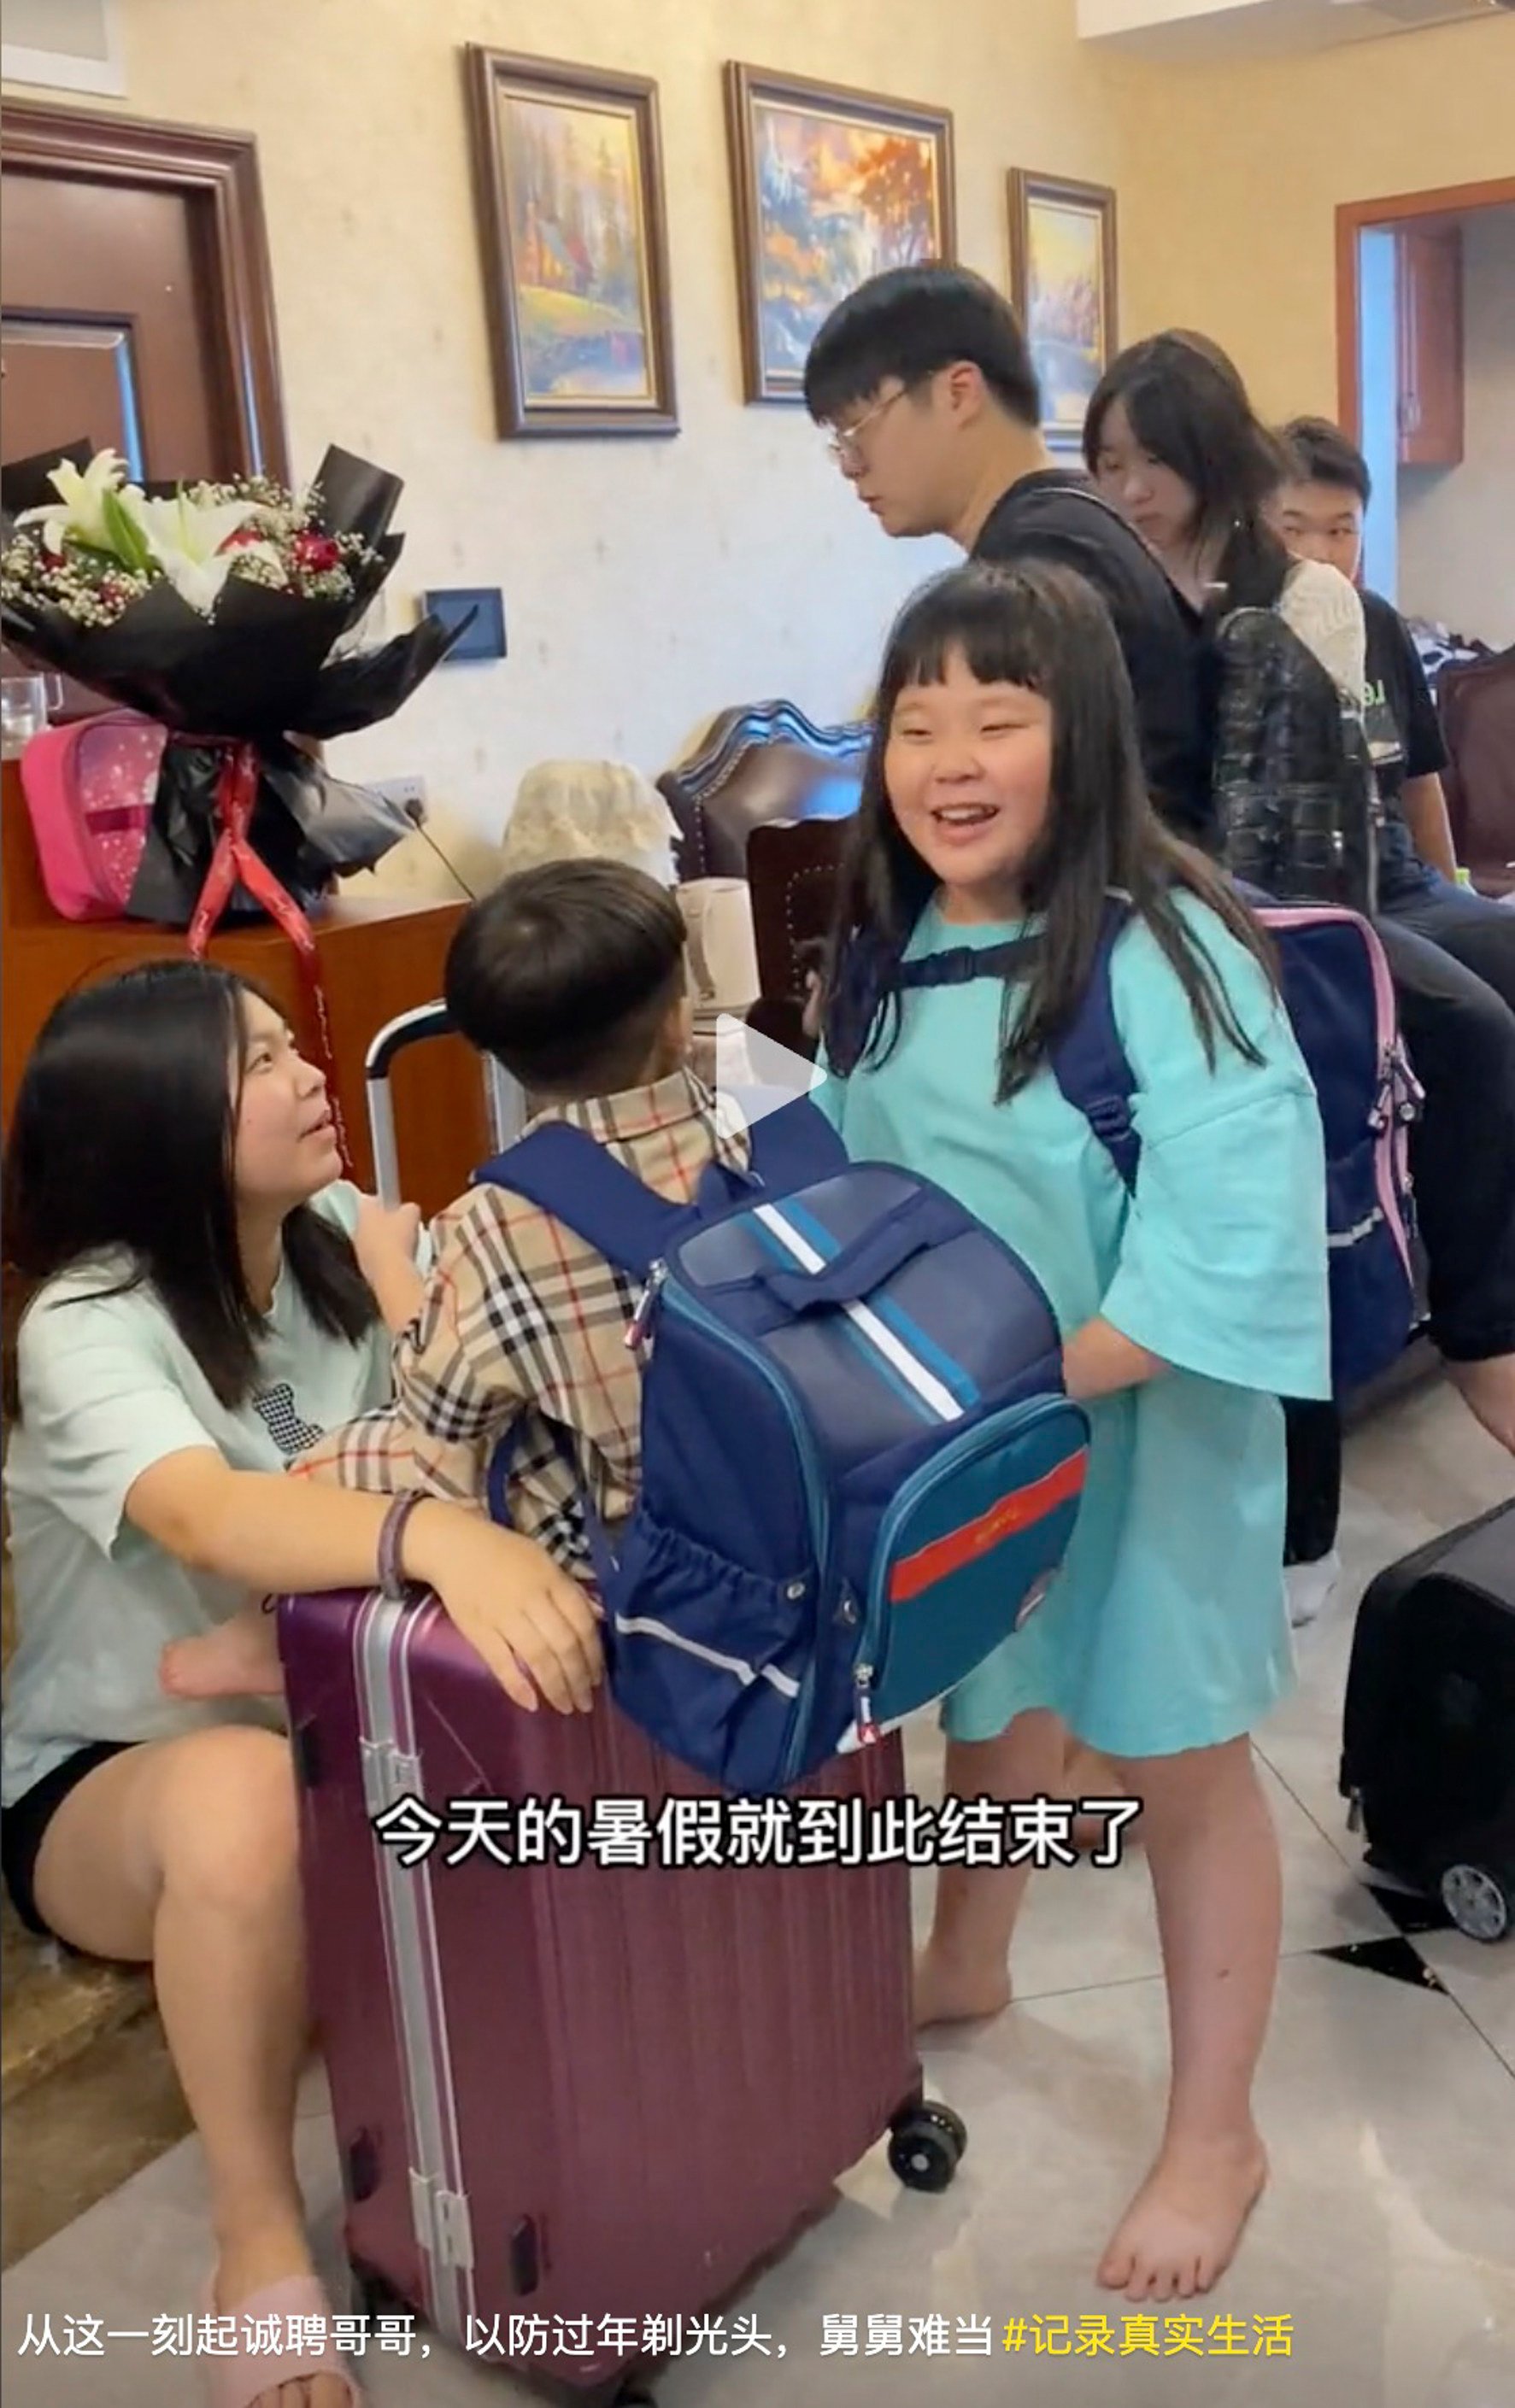 “My sad summer vacation finally comes to an end. I spent 60,000 yuan (US$8,800) on these kids,” Gong captioned one of the videos. Photo: Weibo